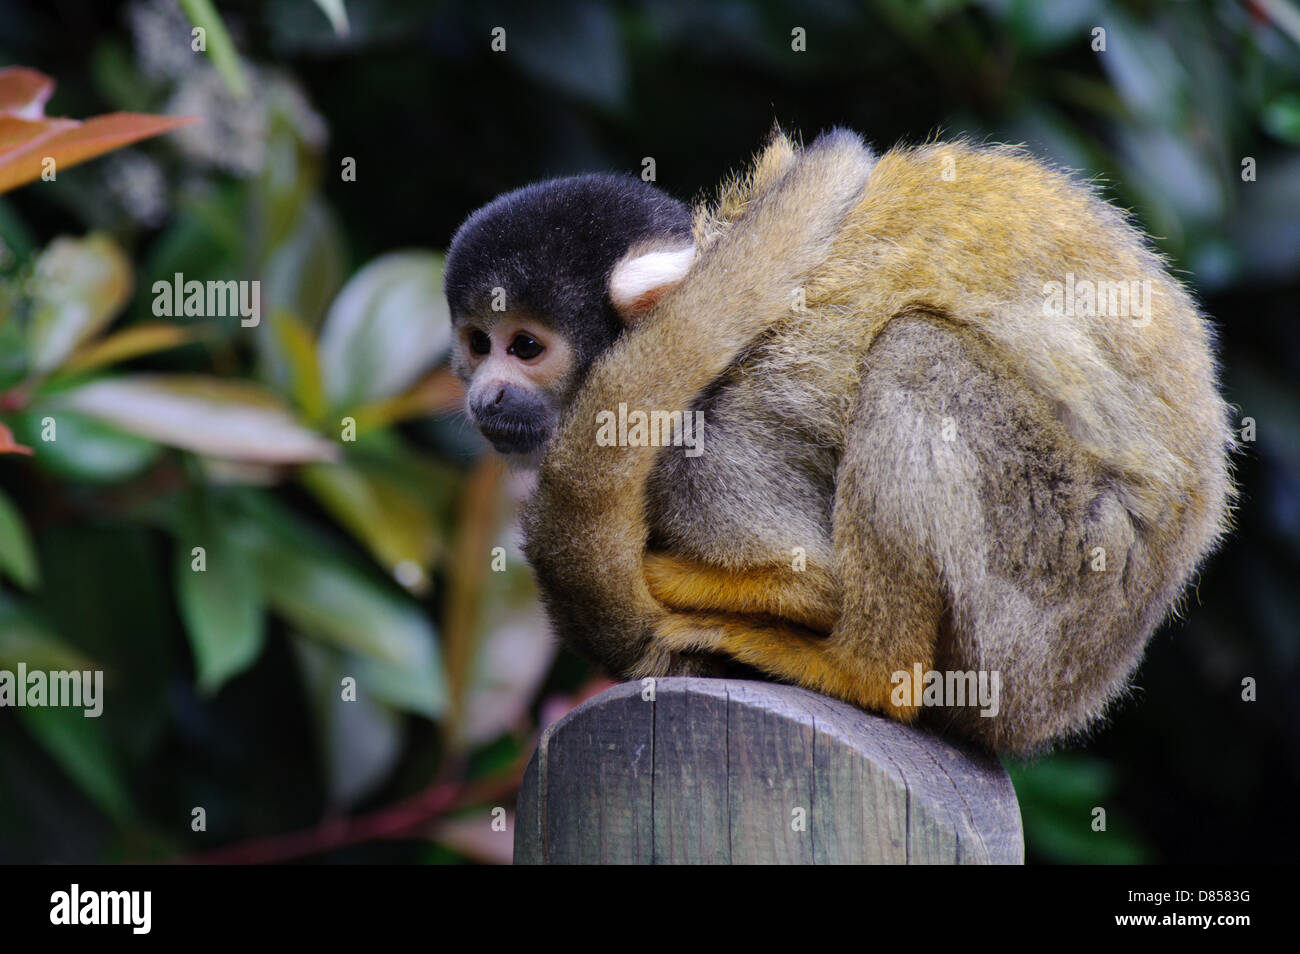 Squirrel monkey alone and watching Stock Photo